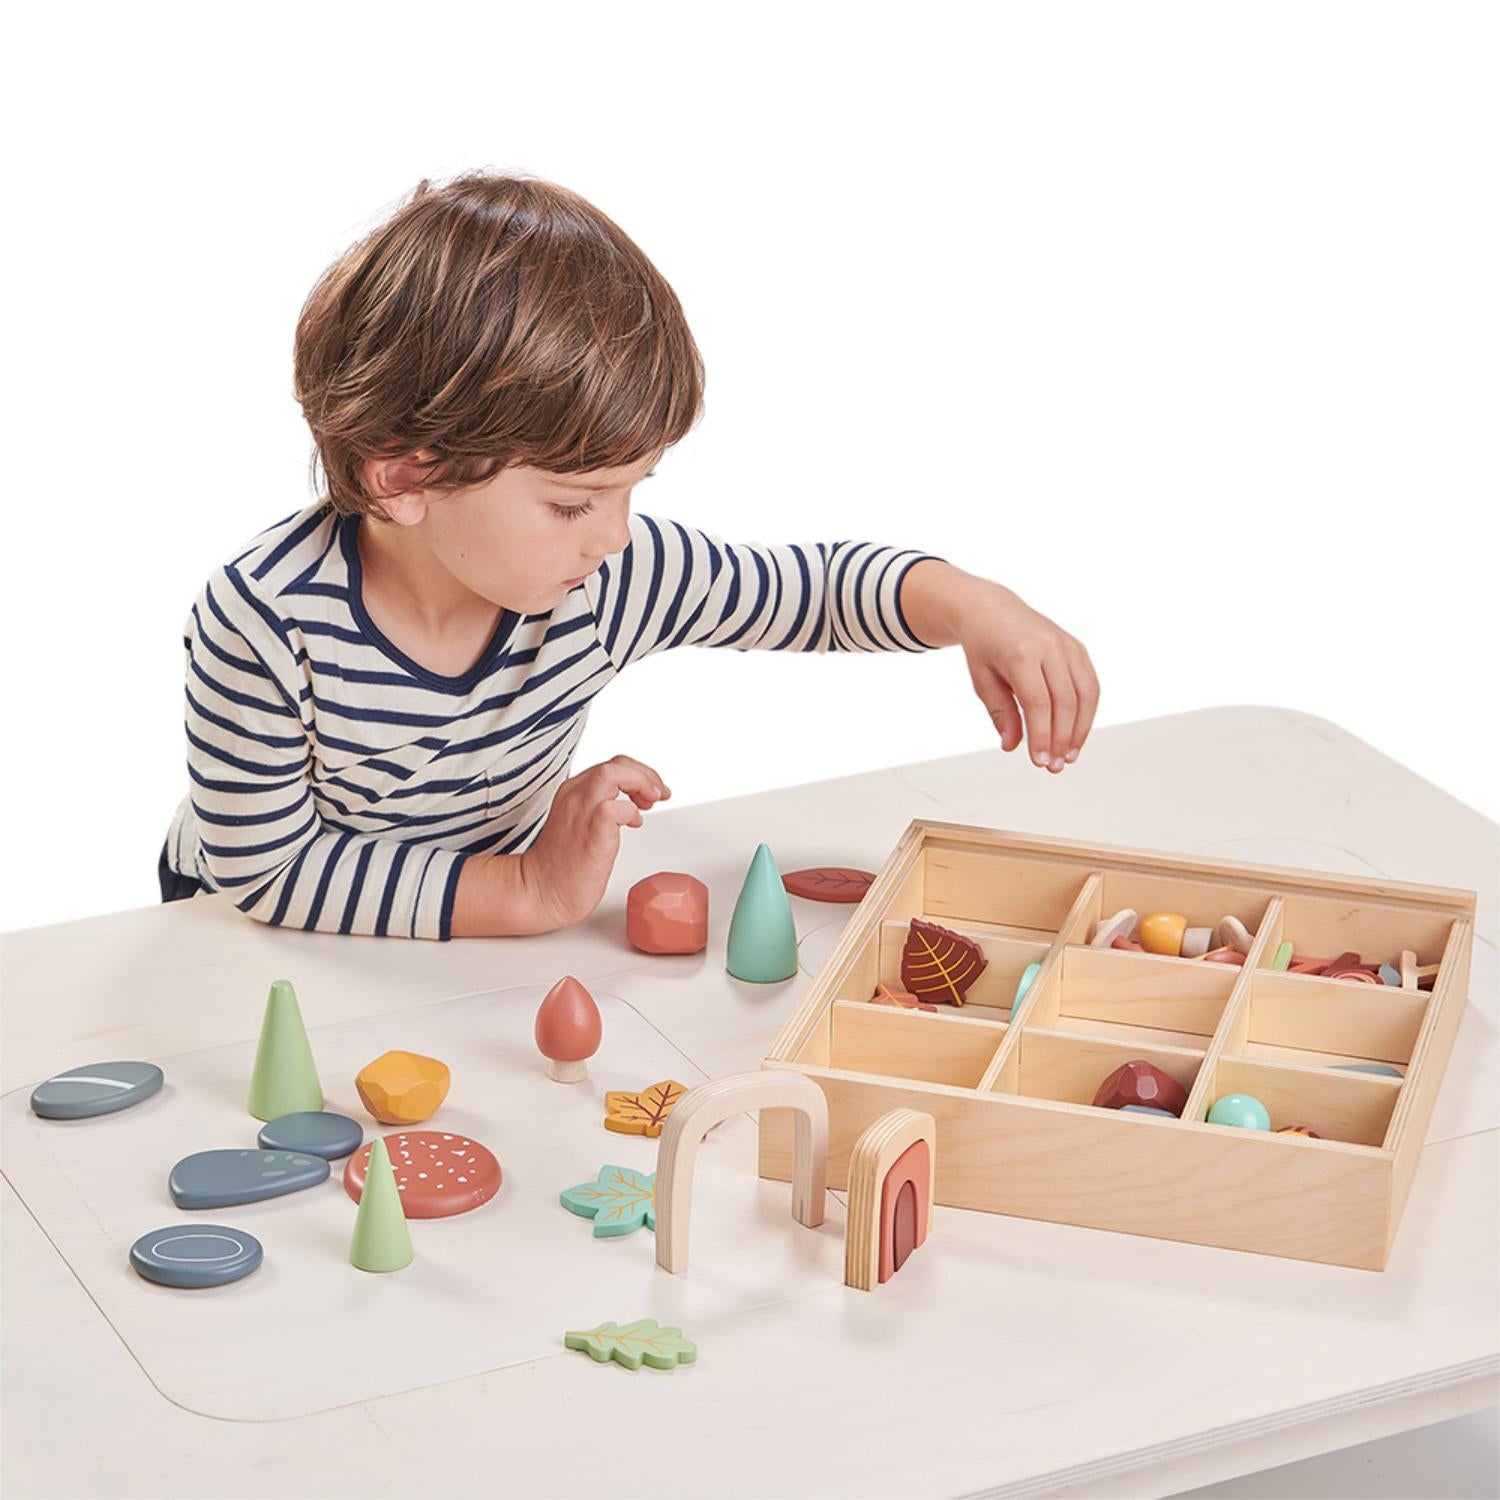 My Forest Floor | Open-Ended Play Wooden Toy Set For Kids | Lifestyle: Boy Playing with Wooden Pieces | BeoVERDE.ie